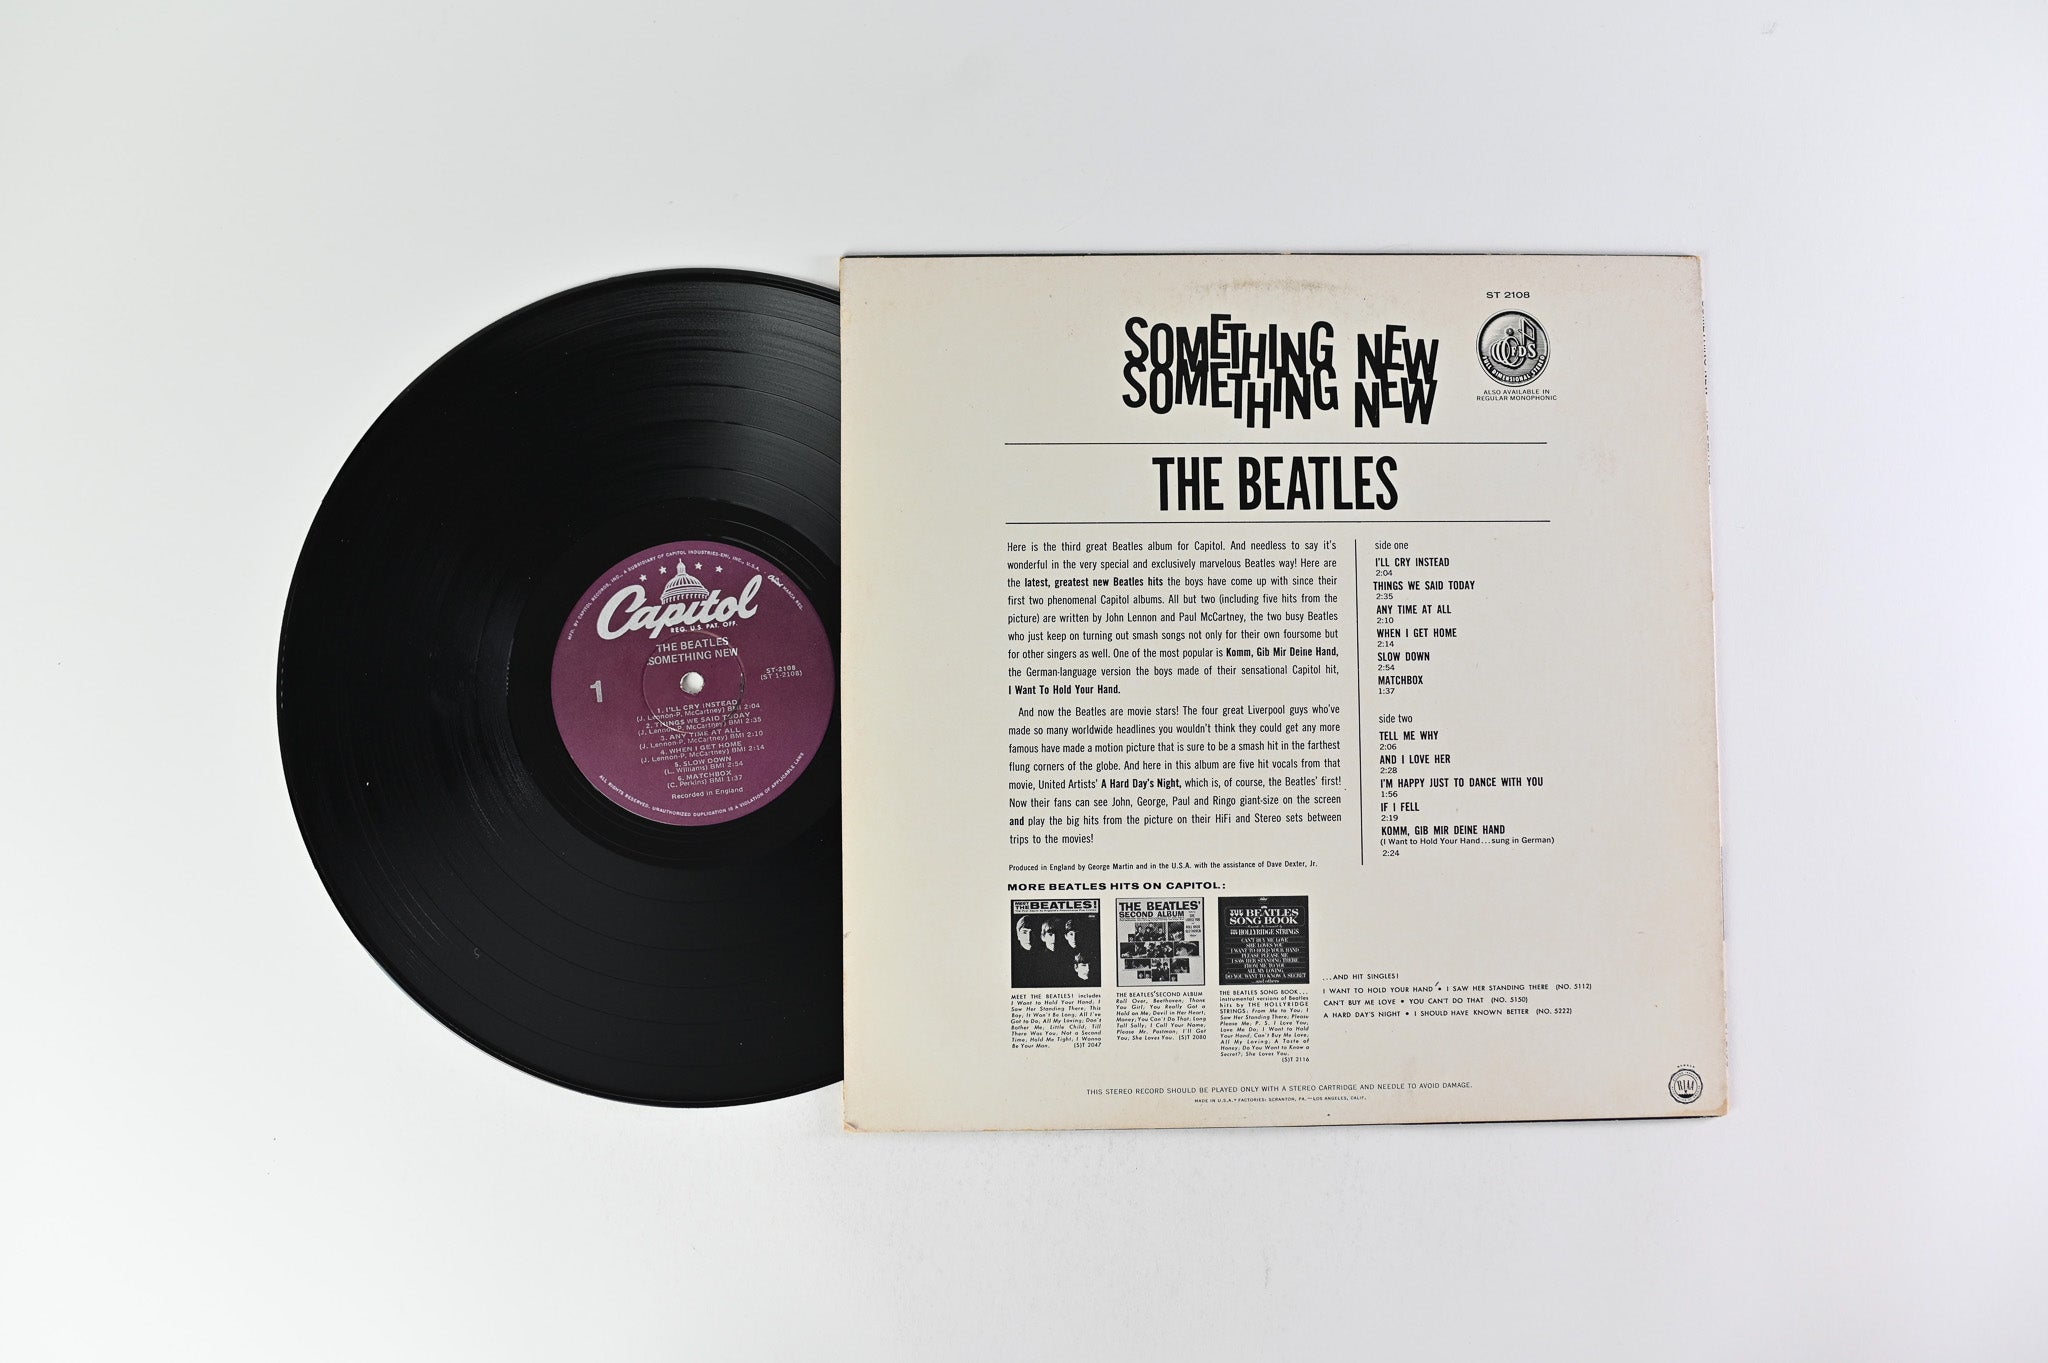 The Beatles - Something New on Capitol Records Reissue